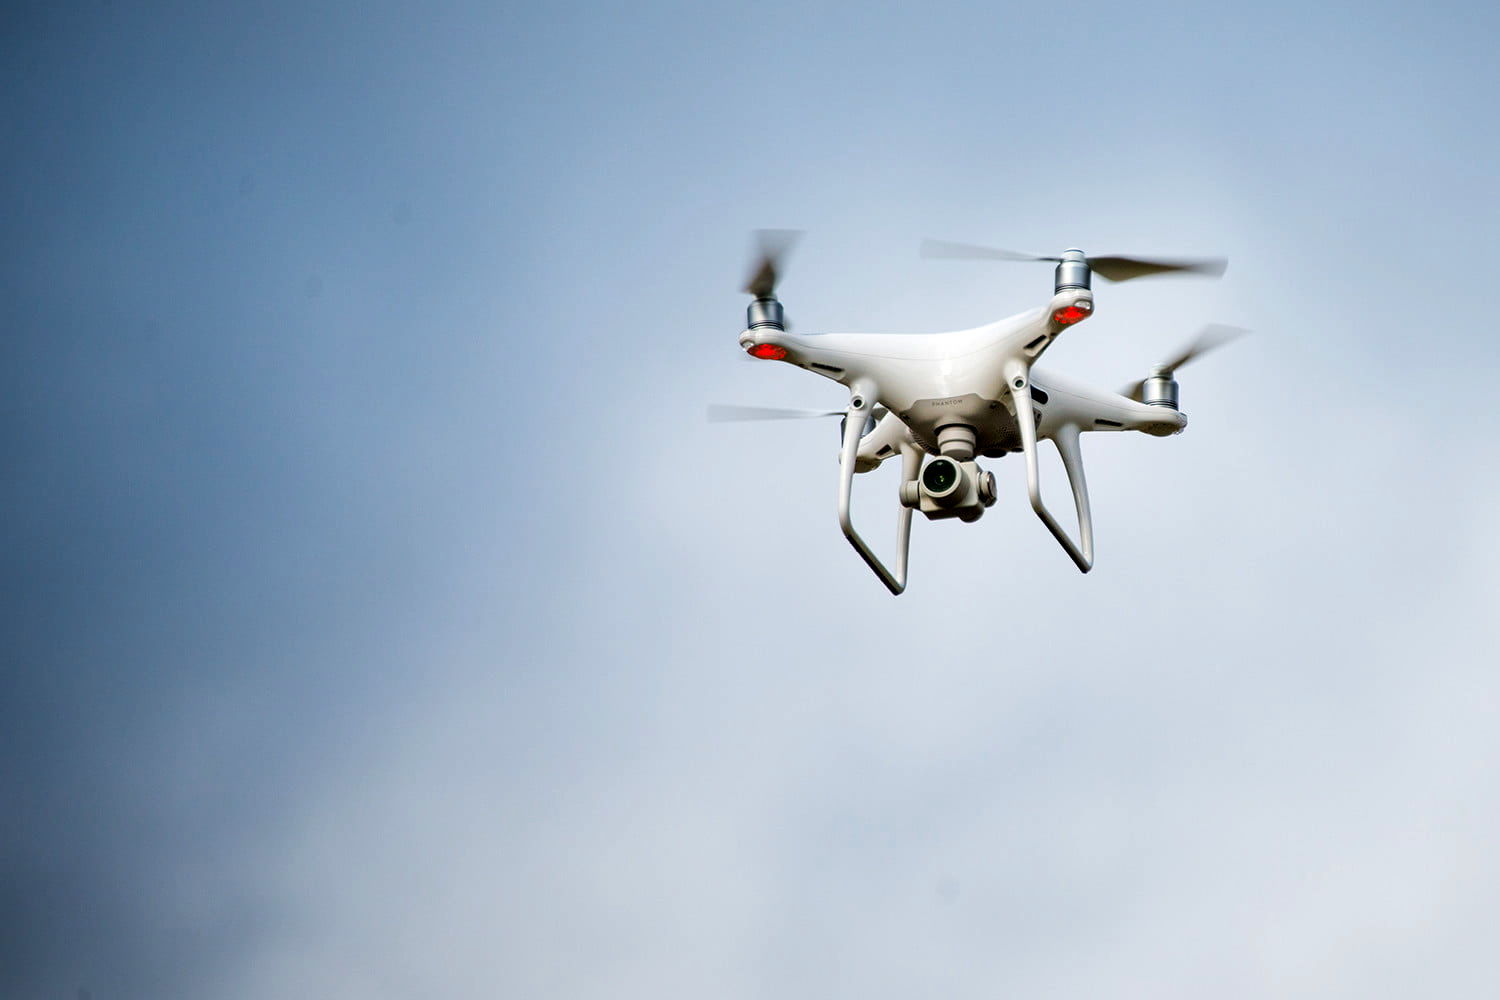 2 US citizens arrested in India for drone flying